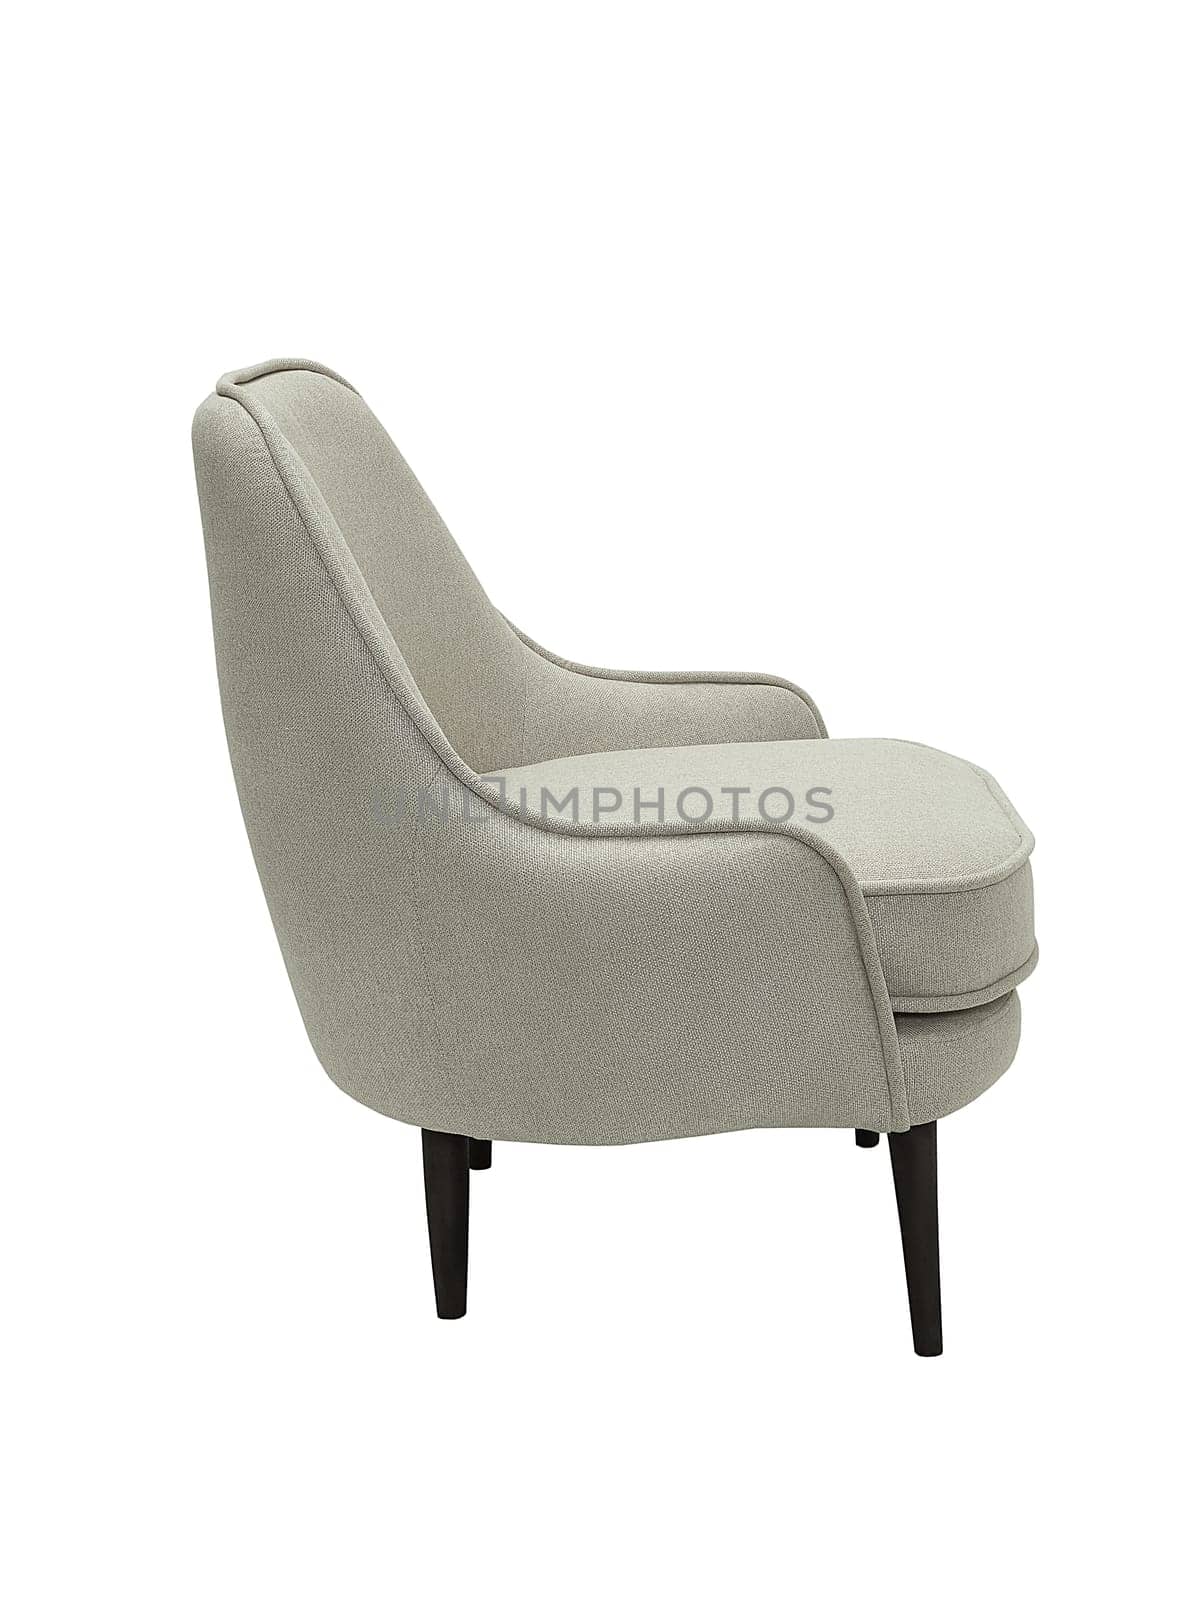 modern fabric gray armchair with wooden legs isolated on white background, side view by artemzatsepilin